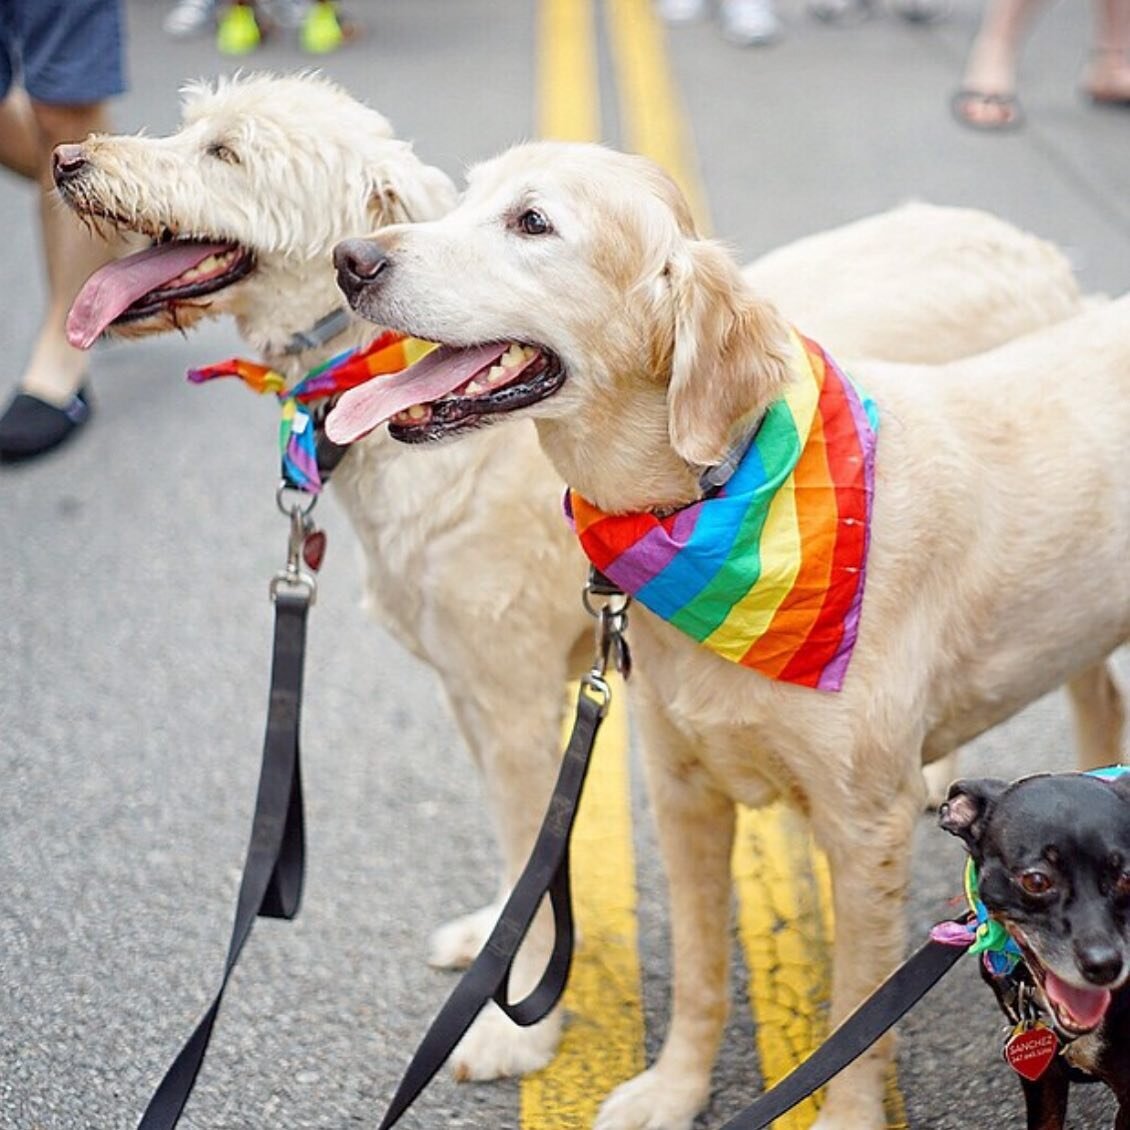 HAY PRIDE DOG SHOW! 

In the tradition of rural county shows fused with the LGBTQI + celebrations and protest, we will be hosting the HAY PRIDE DOG SHOW. 

Dogs of all ages and abilities welcomed. Dog show runs, 3:15pm - 4pm at @haycastletrust and wi